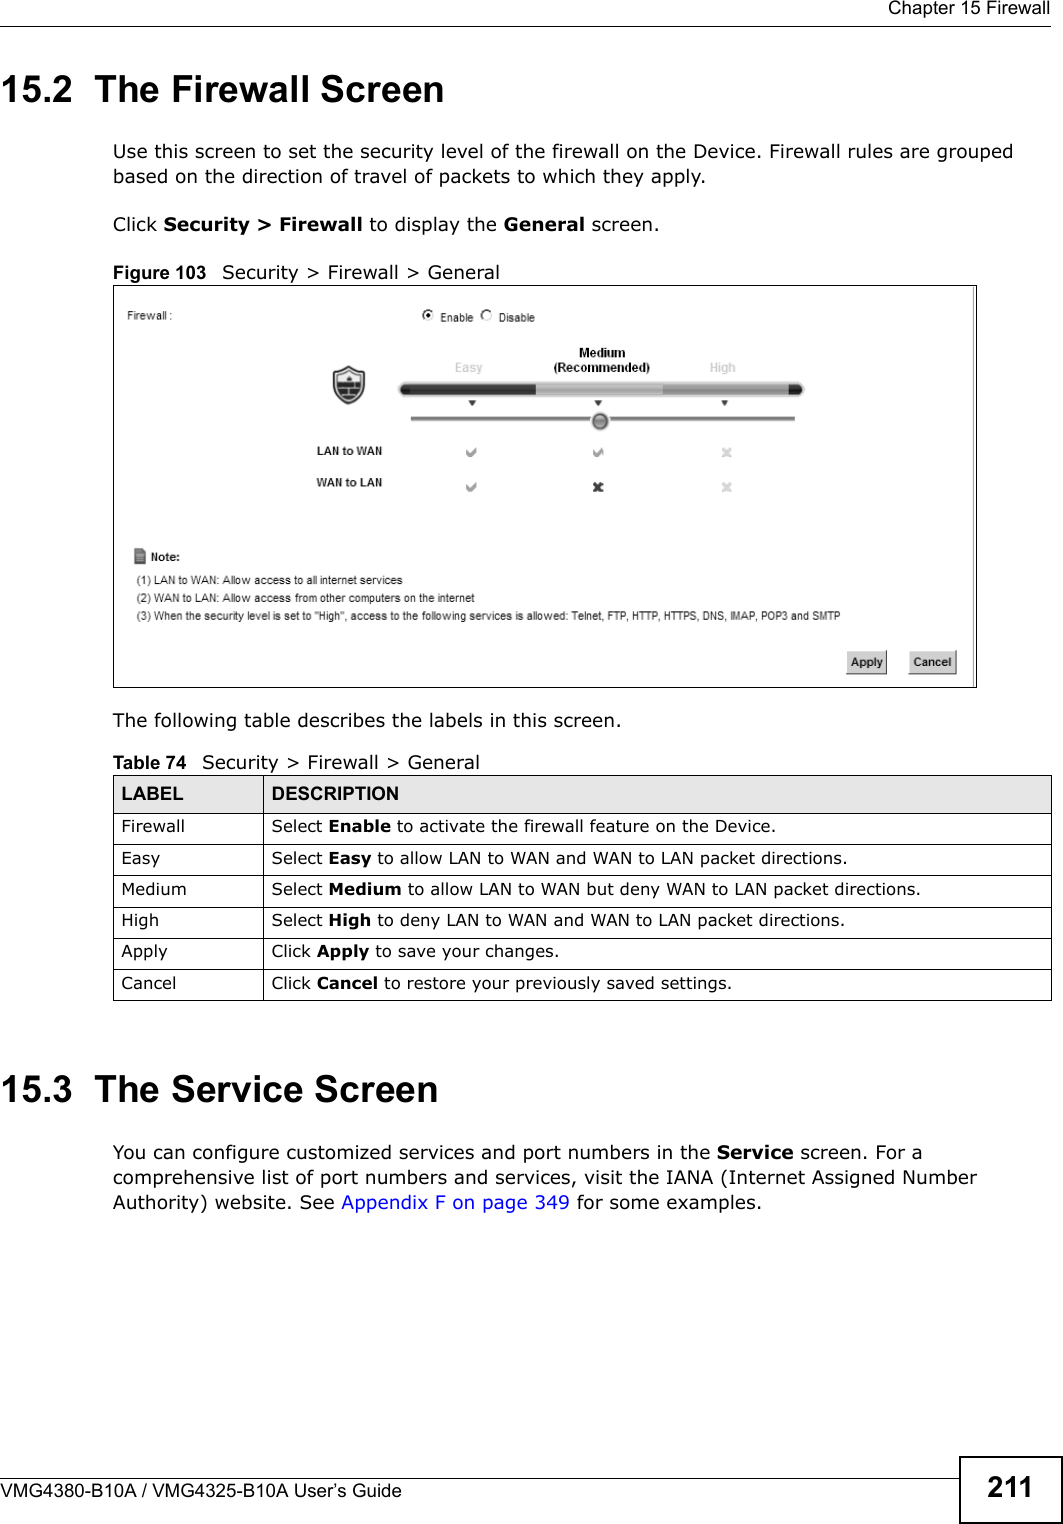  Chapter 15 FirewallVMG4380-B10A / VMG4325-B10A User’s Guide 21115.2  The Firewall ScreenUse this screen to set the security level of the firewall on the Device. Firewall rules are grouped based on the direction of travel of packets to which they apply.Click Security &gt; Firewall to display the General screen. Figure 103   Security &gt; Firewall &gt; GeneralThe following table describes the labels in this screen.15.3  The Service Screen You can configure customized services and port numbers in the Service screen. For a comprehensive list of port numbers and services, visit the IANA (Internet Assigned Number Authority) website. See Appendix F on page 349 for some examples. Table 74   Security &gt; Firewall &gt; GeneralLABEL DESCRIPTIONFirewall Select Enable to activate the firewall feature on the Device.Easy Select Easy to allow LAN to WAN and WAN to LAN packet directions.Medium Select Medium to allow LAN to WAN but deny WAN to LAN packet directions.High Select High to deny LAN to WAN and WAN to LAN packet directions.Apply Click Apply to save your changes.Cancel Click Cancel to restore your previously saved settings.